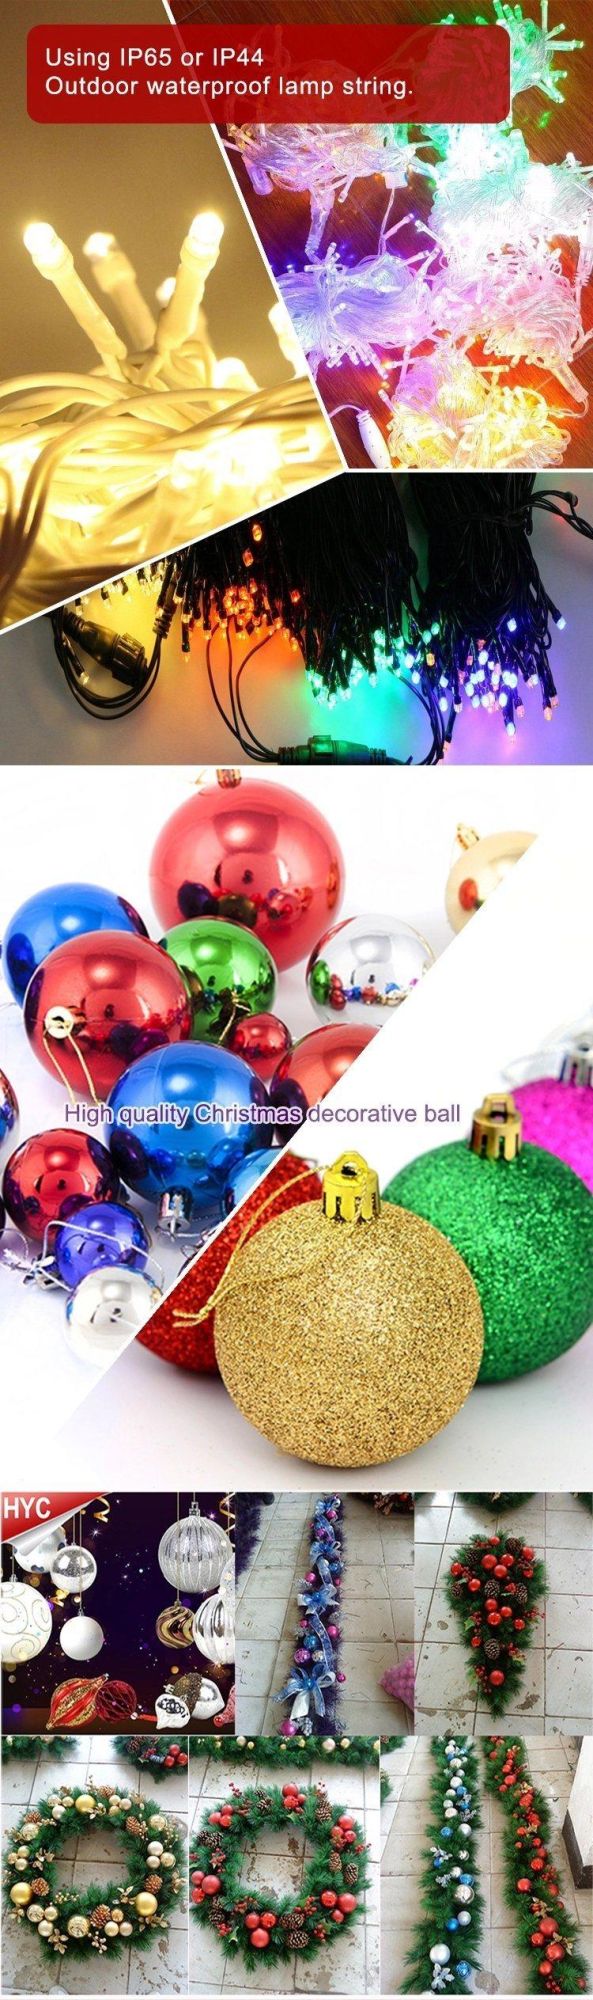 Acrylic Christmas Decorations Outdoor/ LED Christmas Outdoor Ornament/Reindeer Christmas Decoration